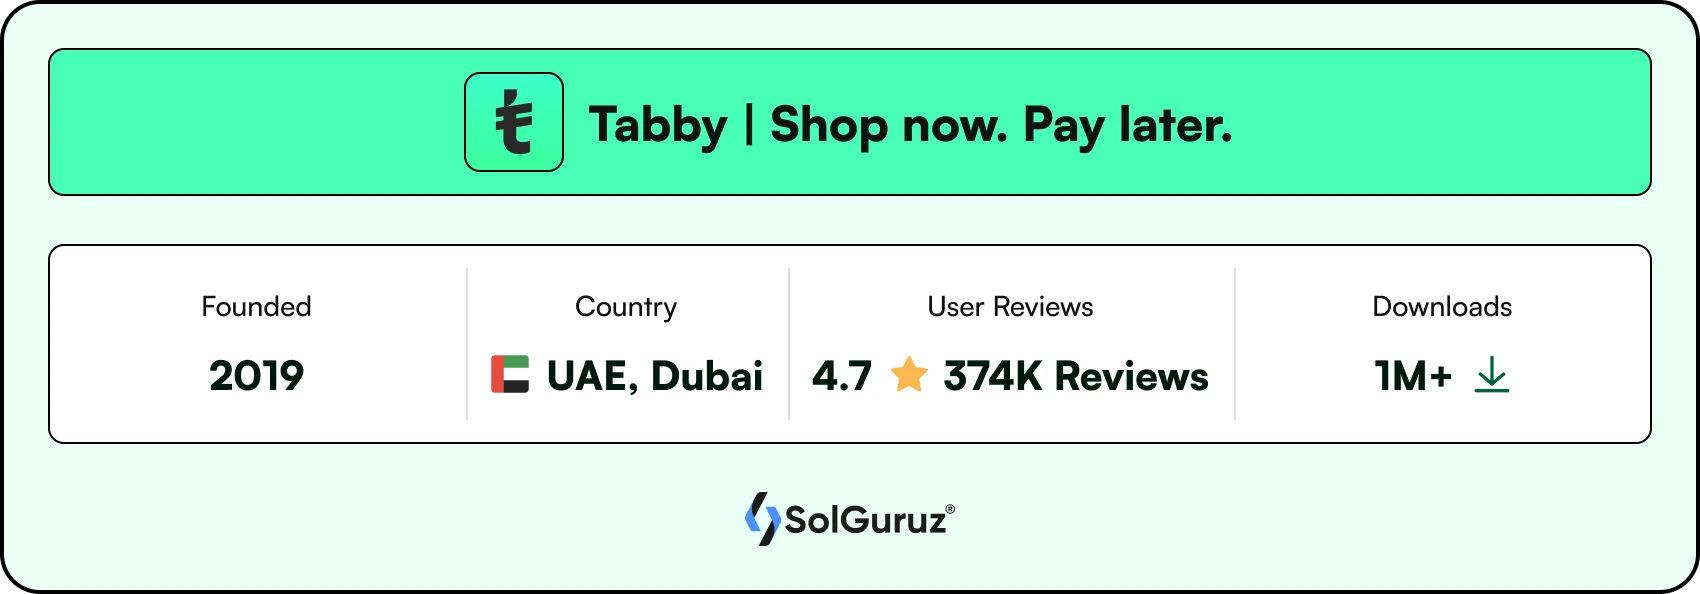 Tabby - Shop now Pay later App